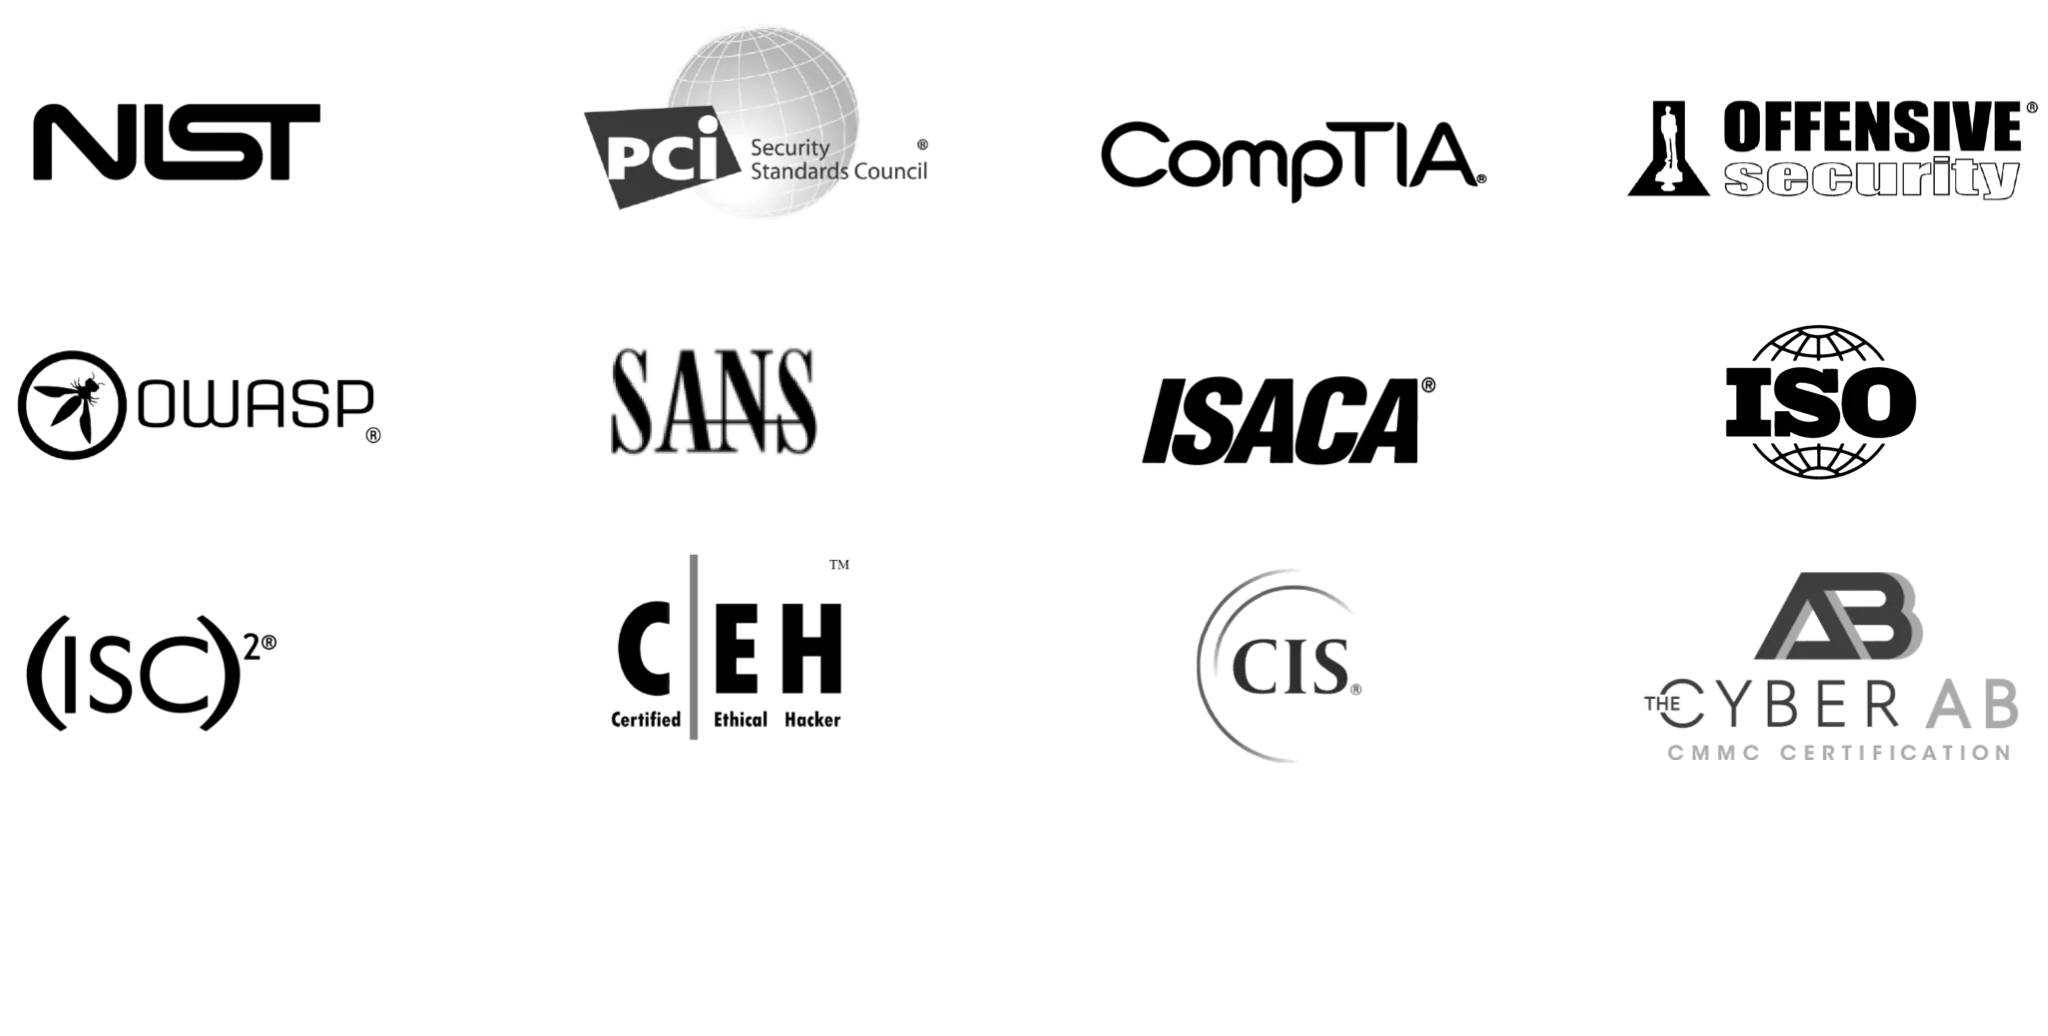 A list of certification logos including NIST, PCISSC, CompTIA, Offensive Security, OWASP, SANS, ISACA, ISO, ISC, CEH, CIS and Cyber AB